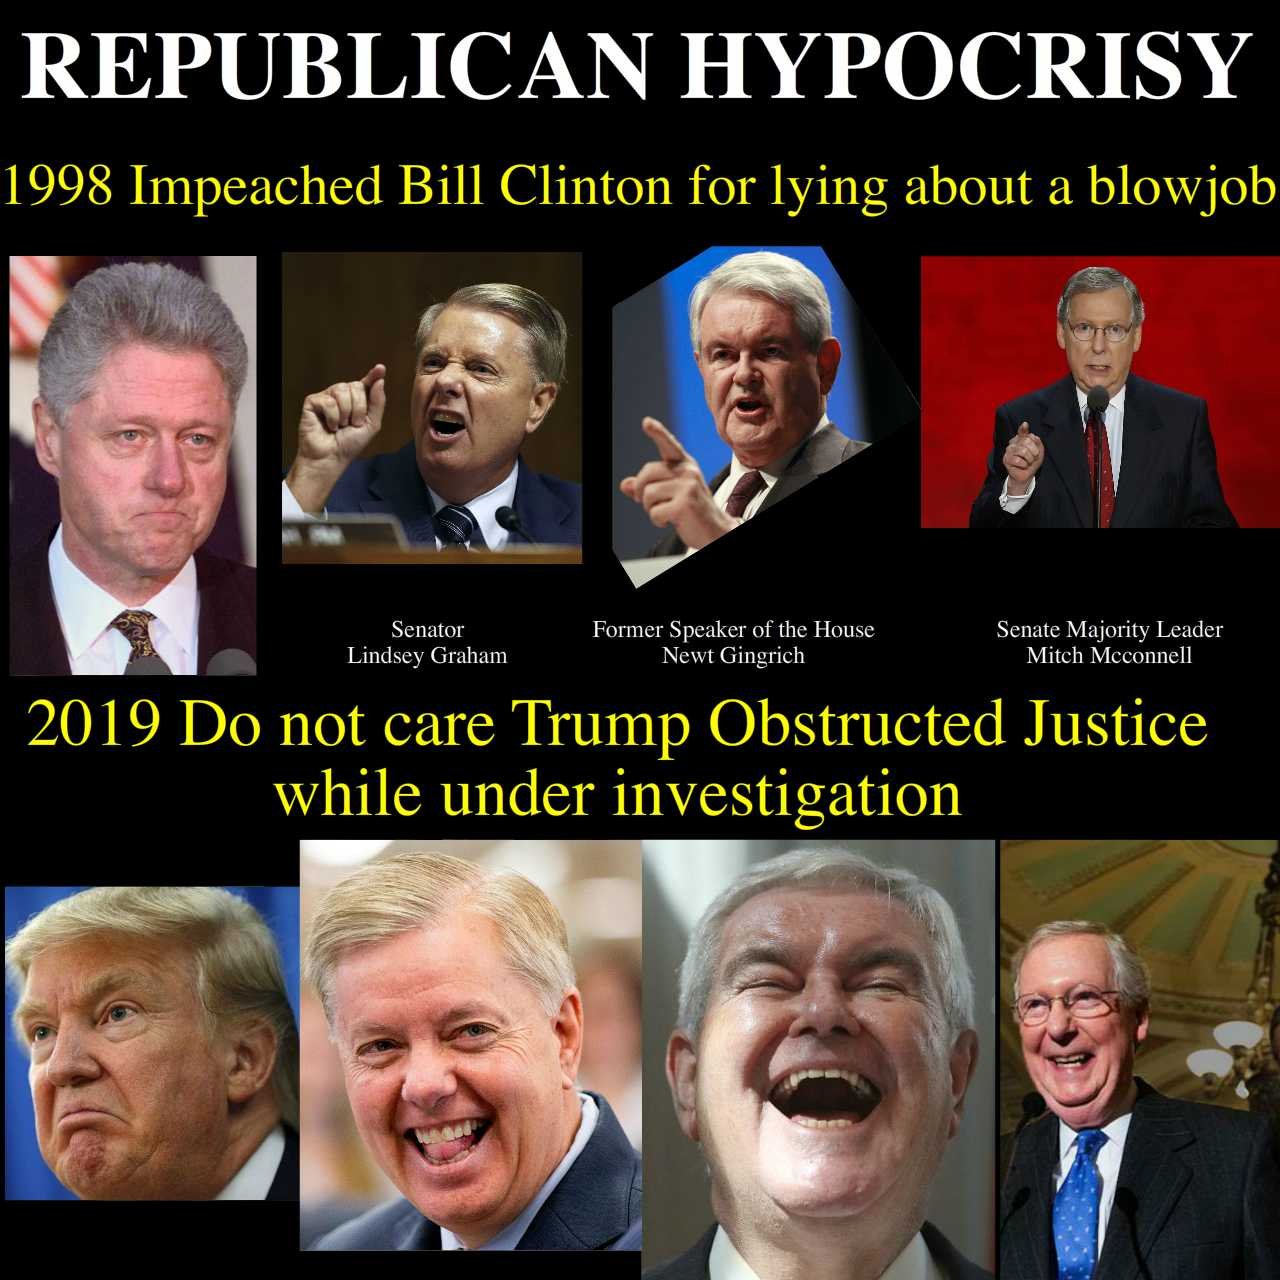 political memes liberals - Republican Hypocrisy 1998 Impeached Bill Clinton for lying about a blowjob Senator Lindsey Graham Former Speaker of the House Newt Gingrich Senate Majority Leader Mitch Mcconnell 2019 Do not care Trump Obstructed Justice while u